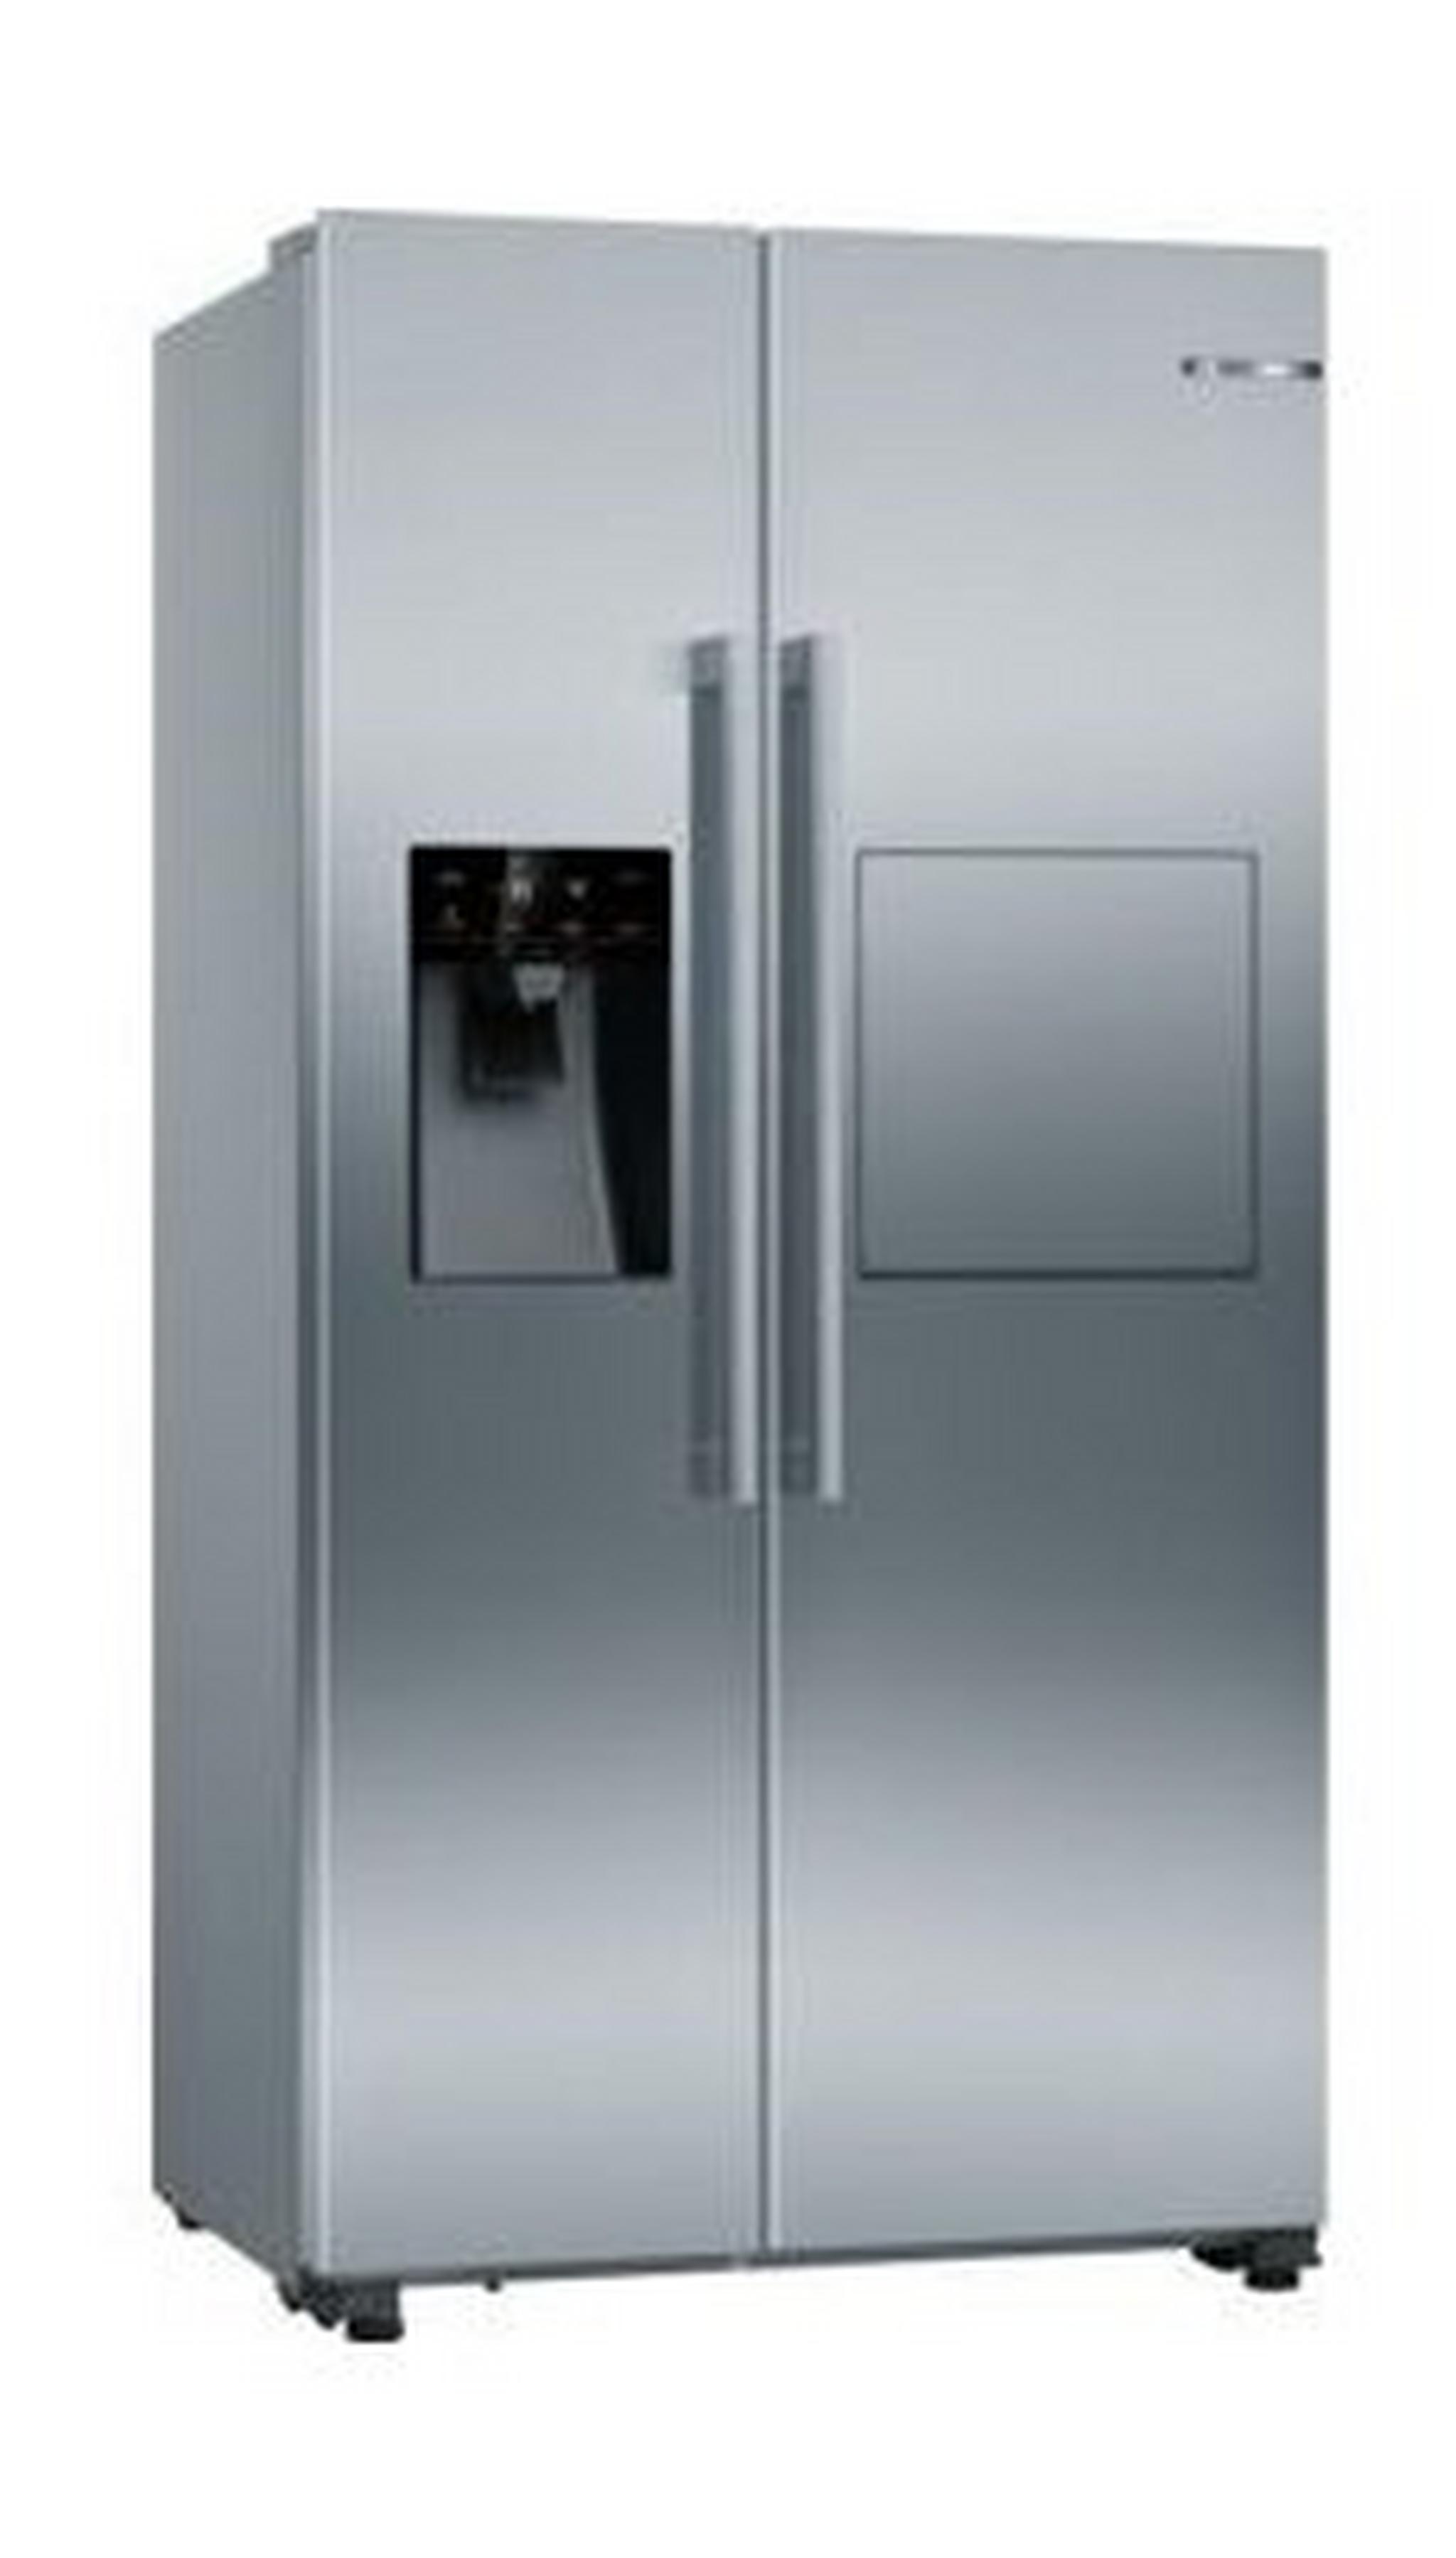 Bosch 21CFT Side By Side Refrigerator and Freezer (KAG93AI30M ) - Stainless Steel